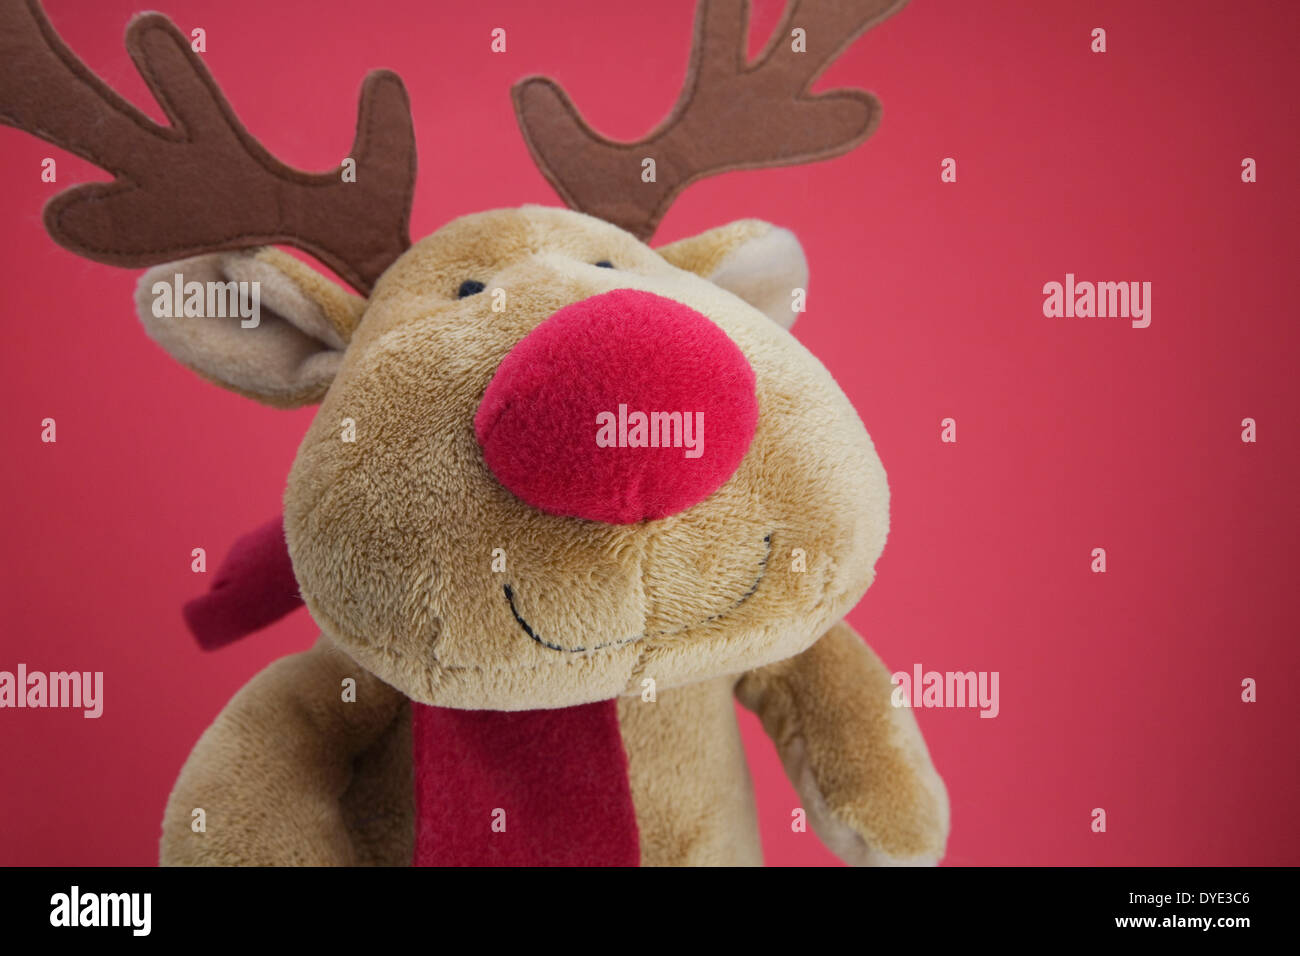 Rudolph the red-nosed reindeer soft toy teddy Stock Photo